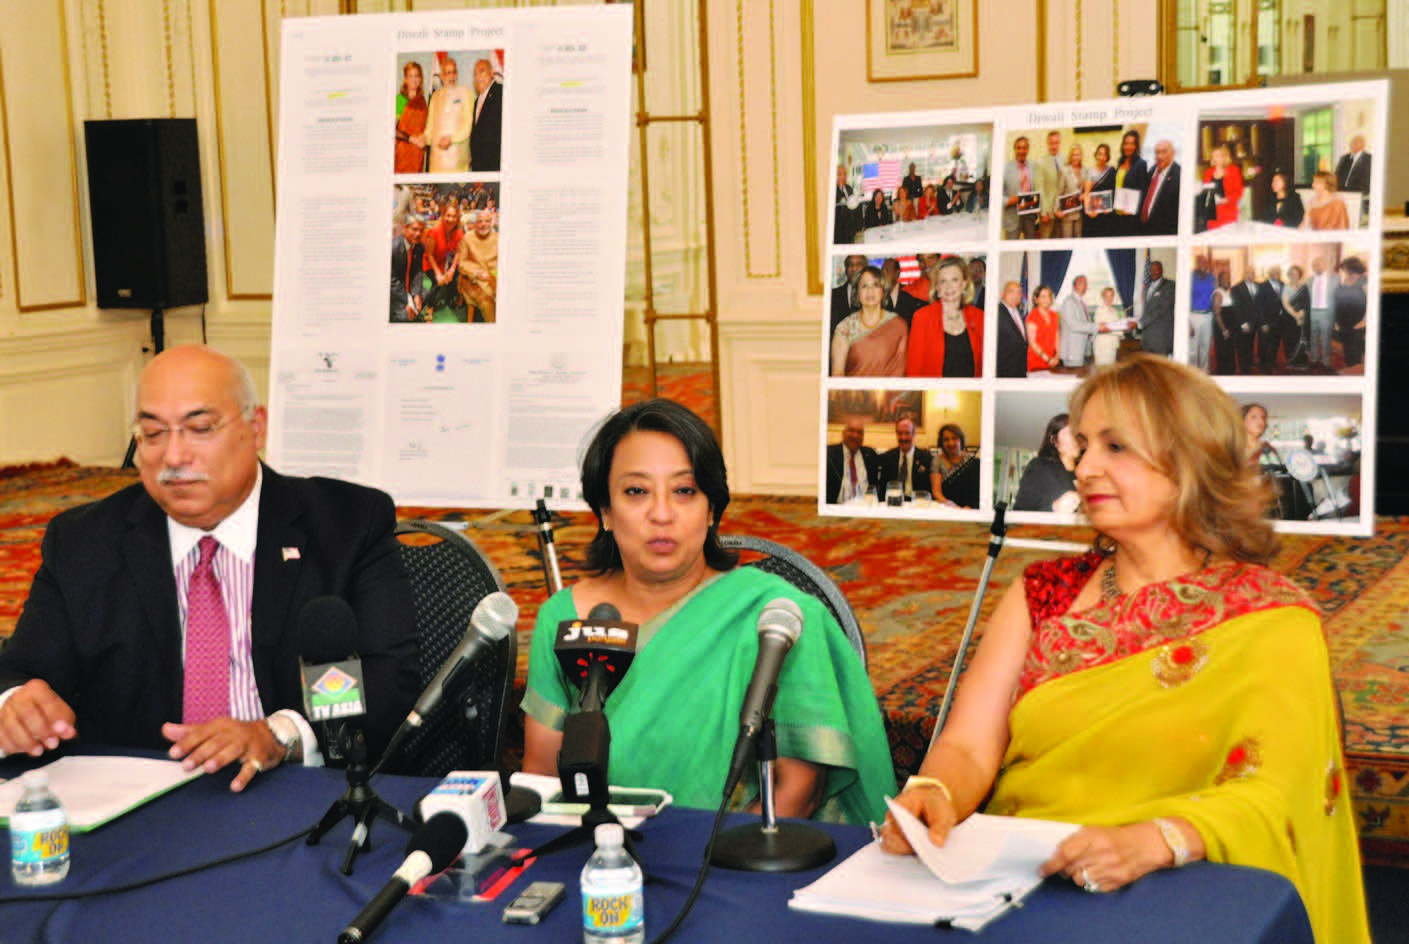 Consul General of India in New York, Riva Ganguly Das (center) addresses mediapersons at the press conference to announce the arrangements for the unveiling of the Diwali Commemorative stamp, September 21. Ranju Batra, Chair of the Diwali Stamp Project is to her left and, to her right is Ravi Batra - Photo/ Vijay Shah